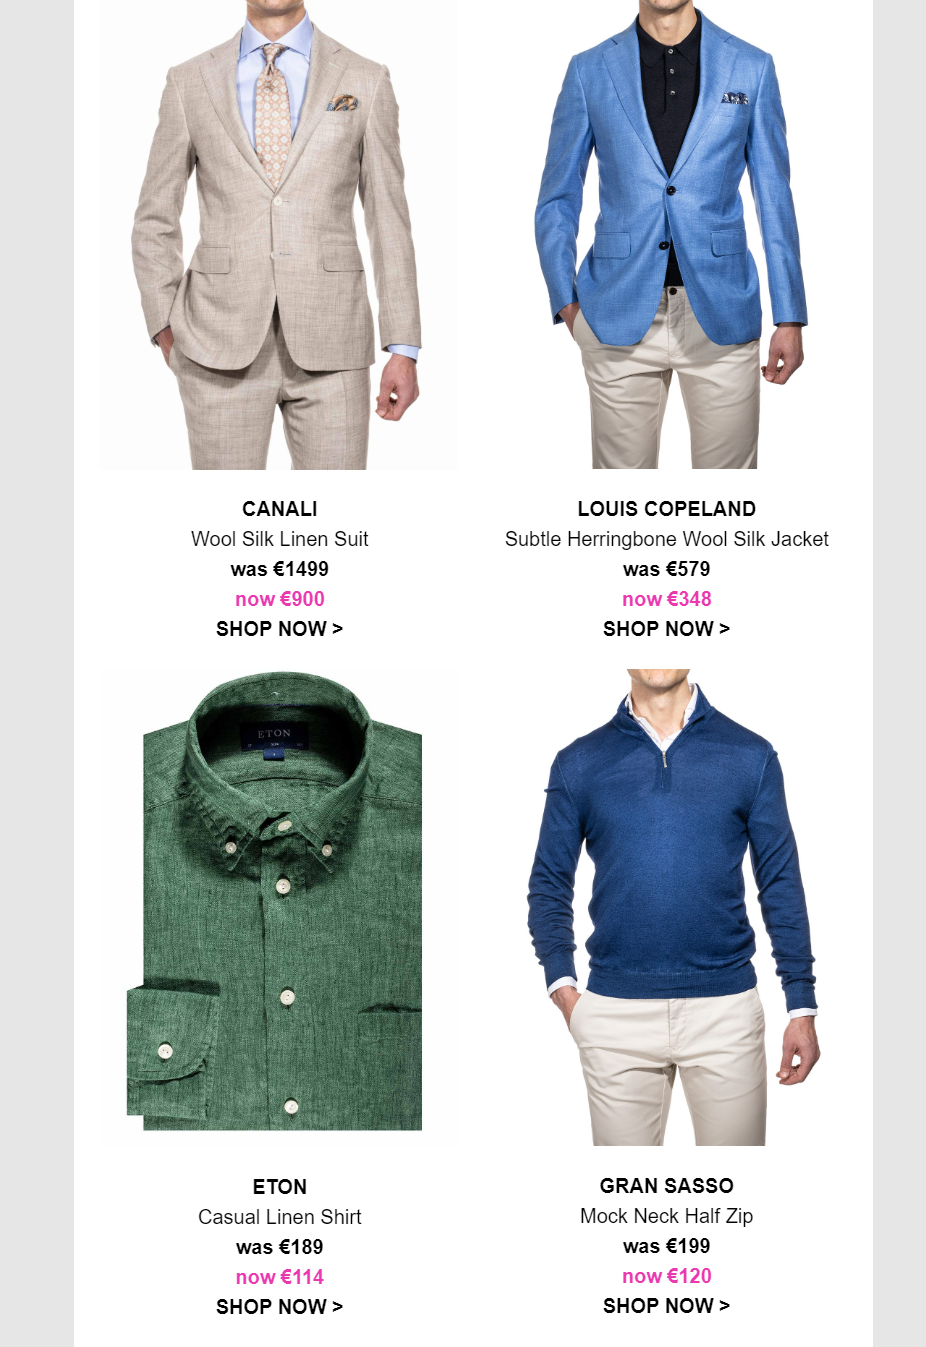 Louis Copeland & Sons - Deliveries Are Back - 40% Off Everything